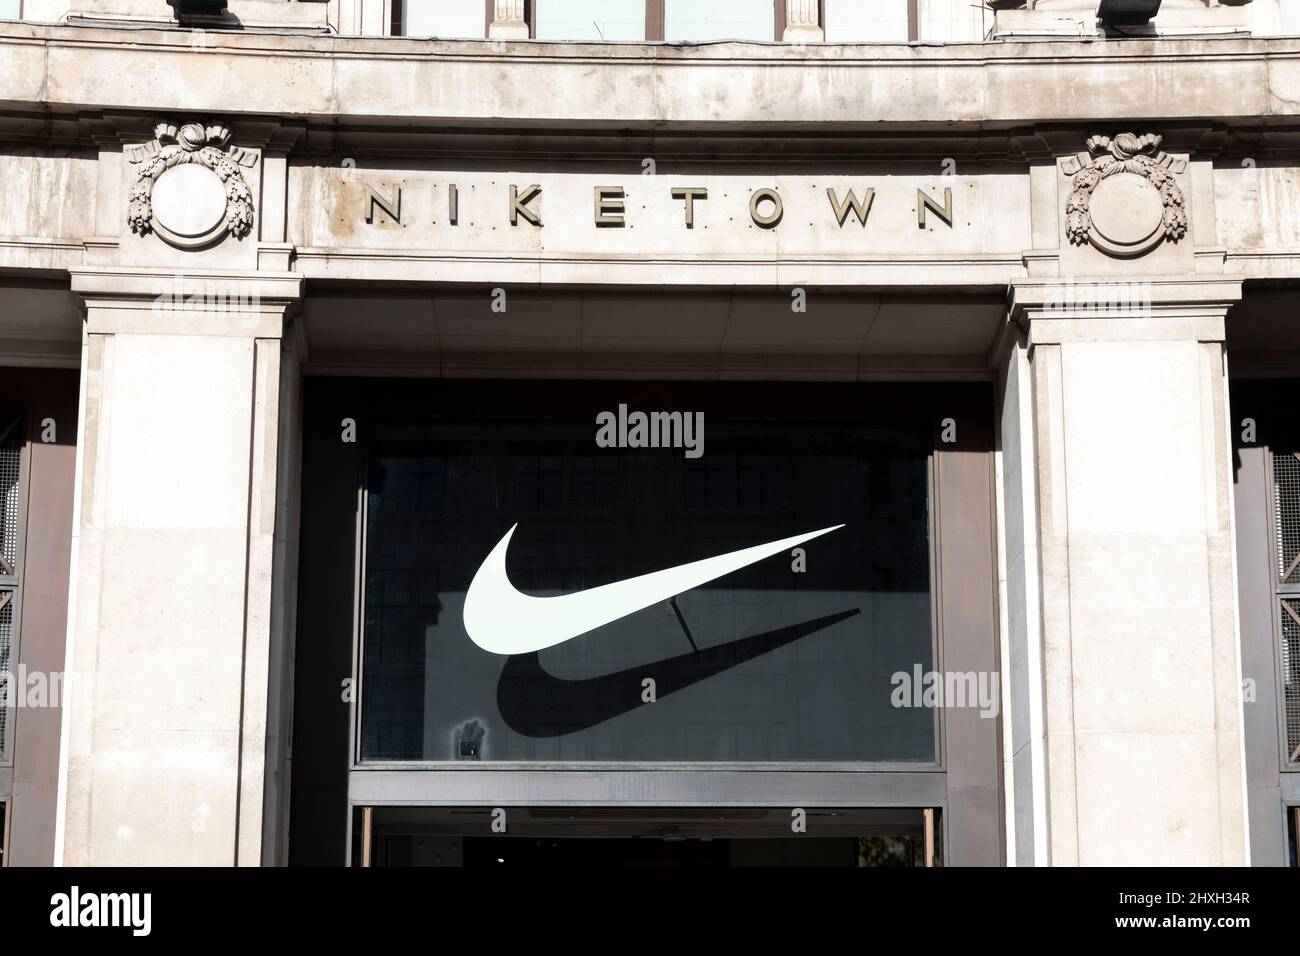 Nike Store London High Resolution Stock Photography and Images - Alamy